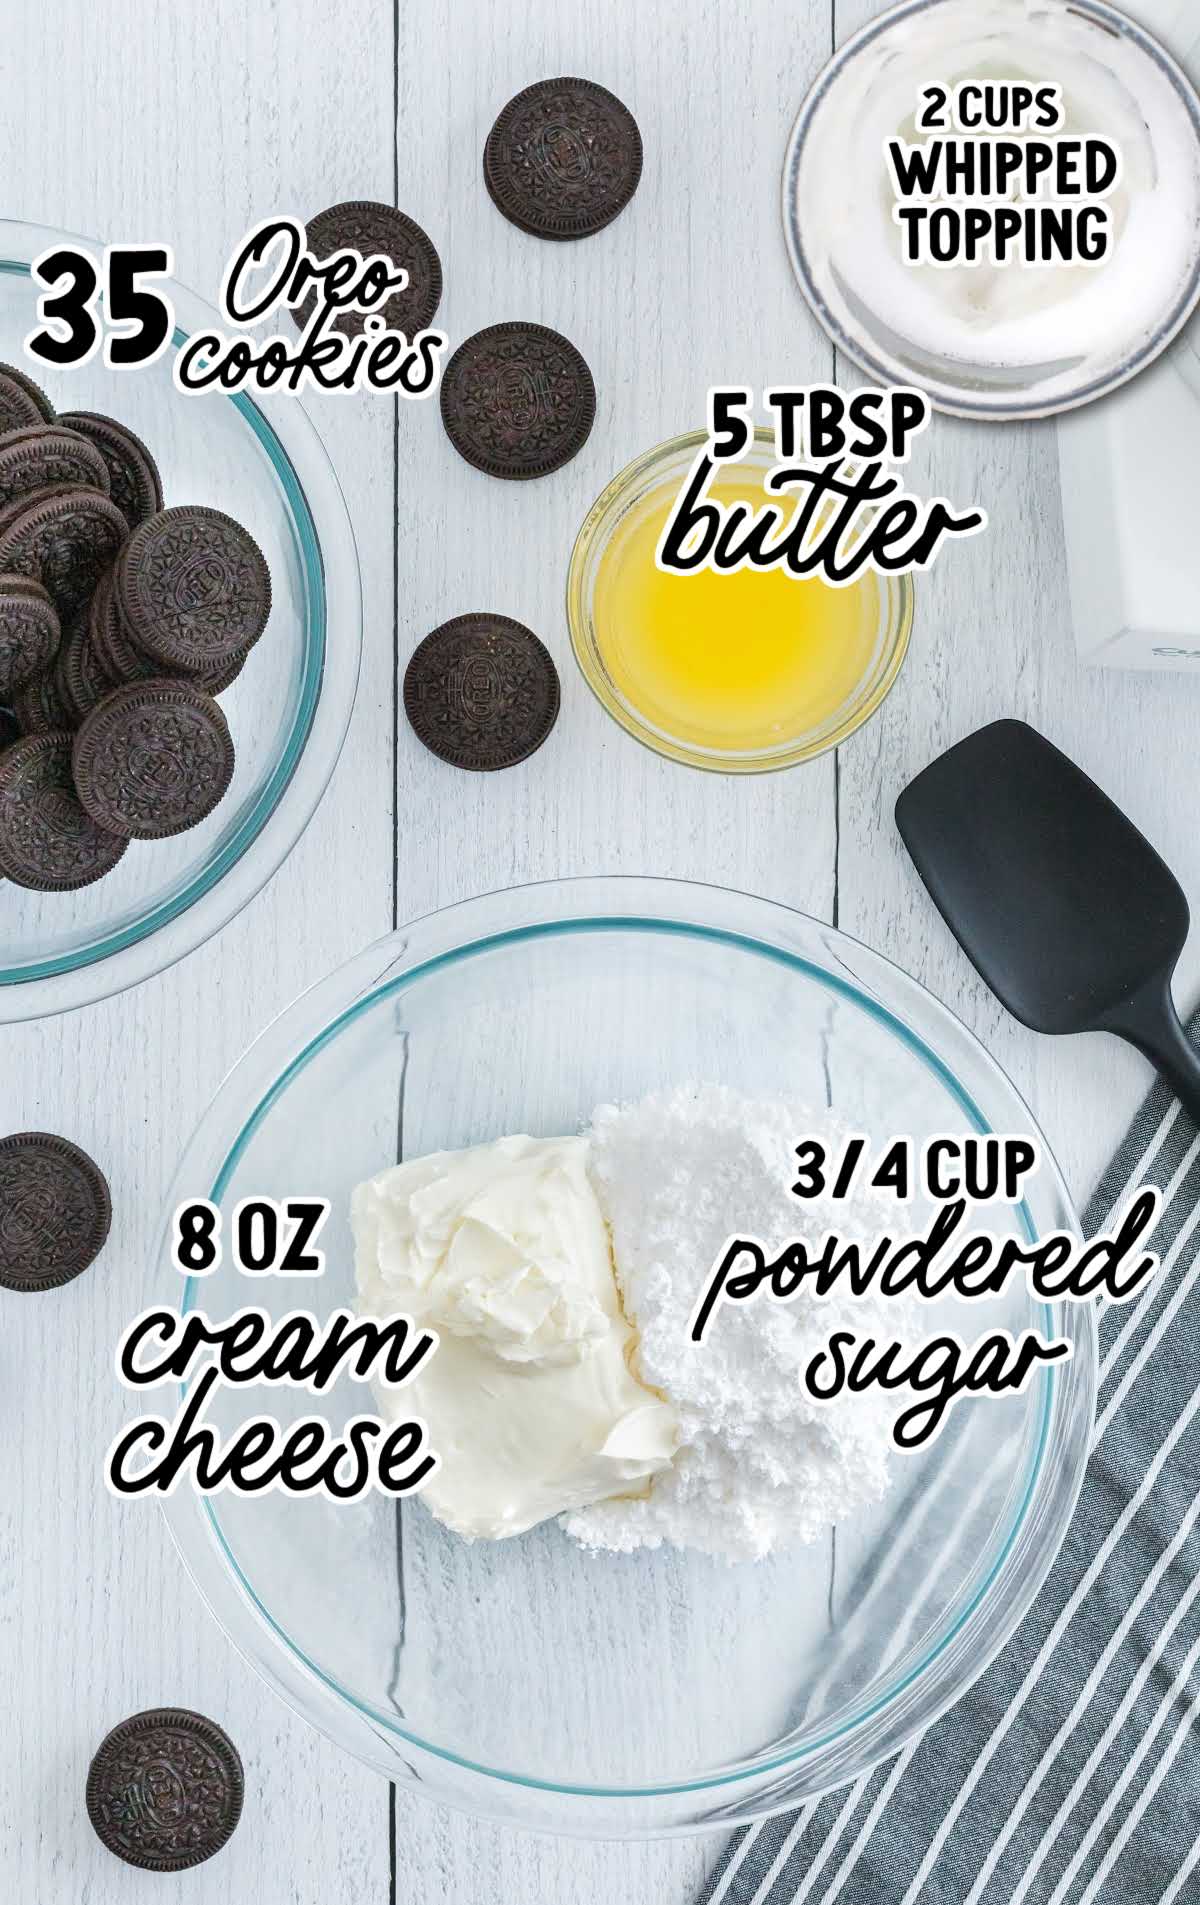 Oreo Pie raw ingredients that are labeled